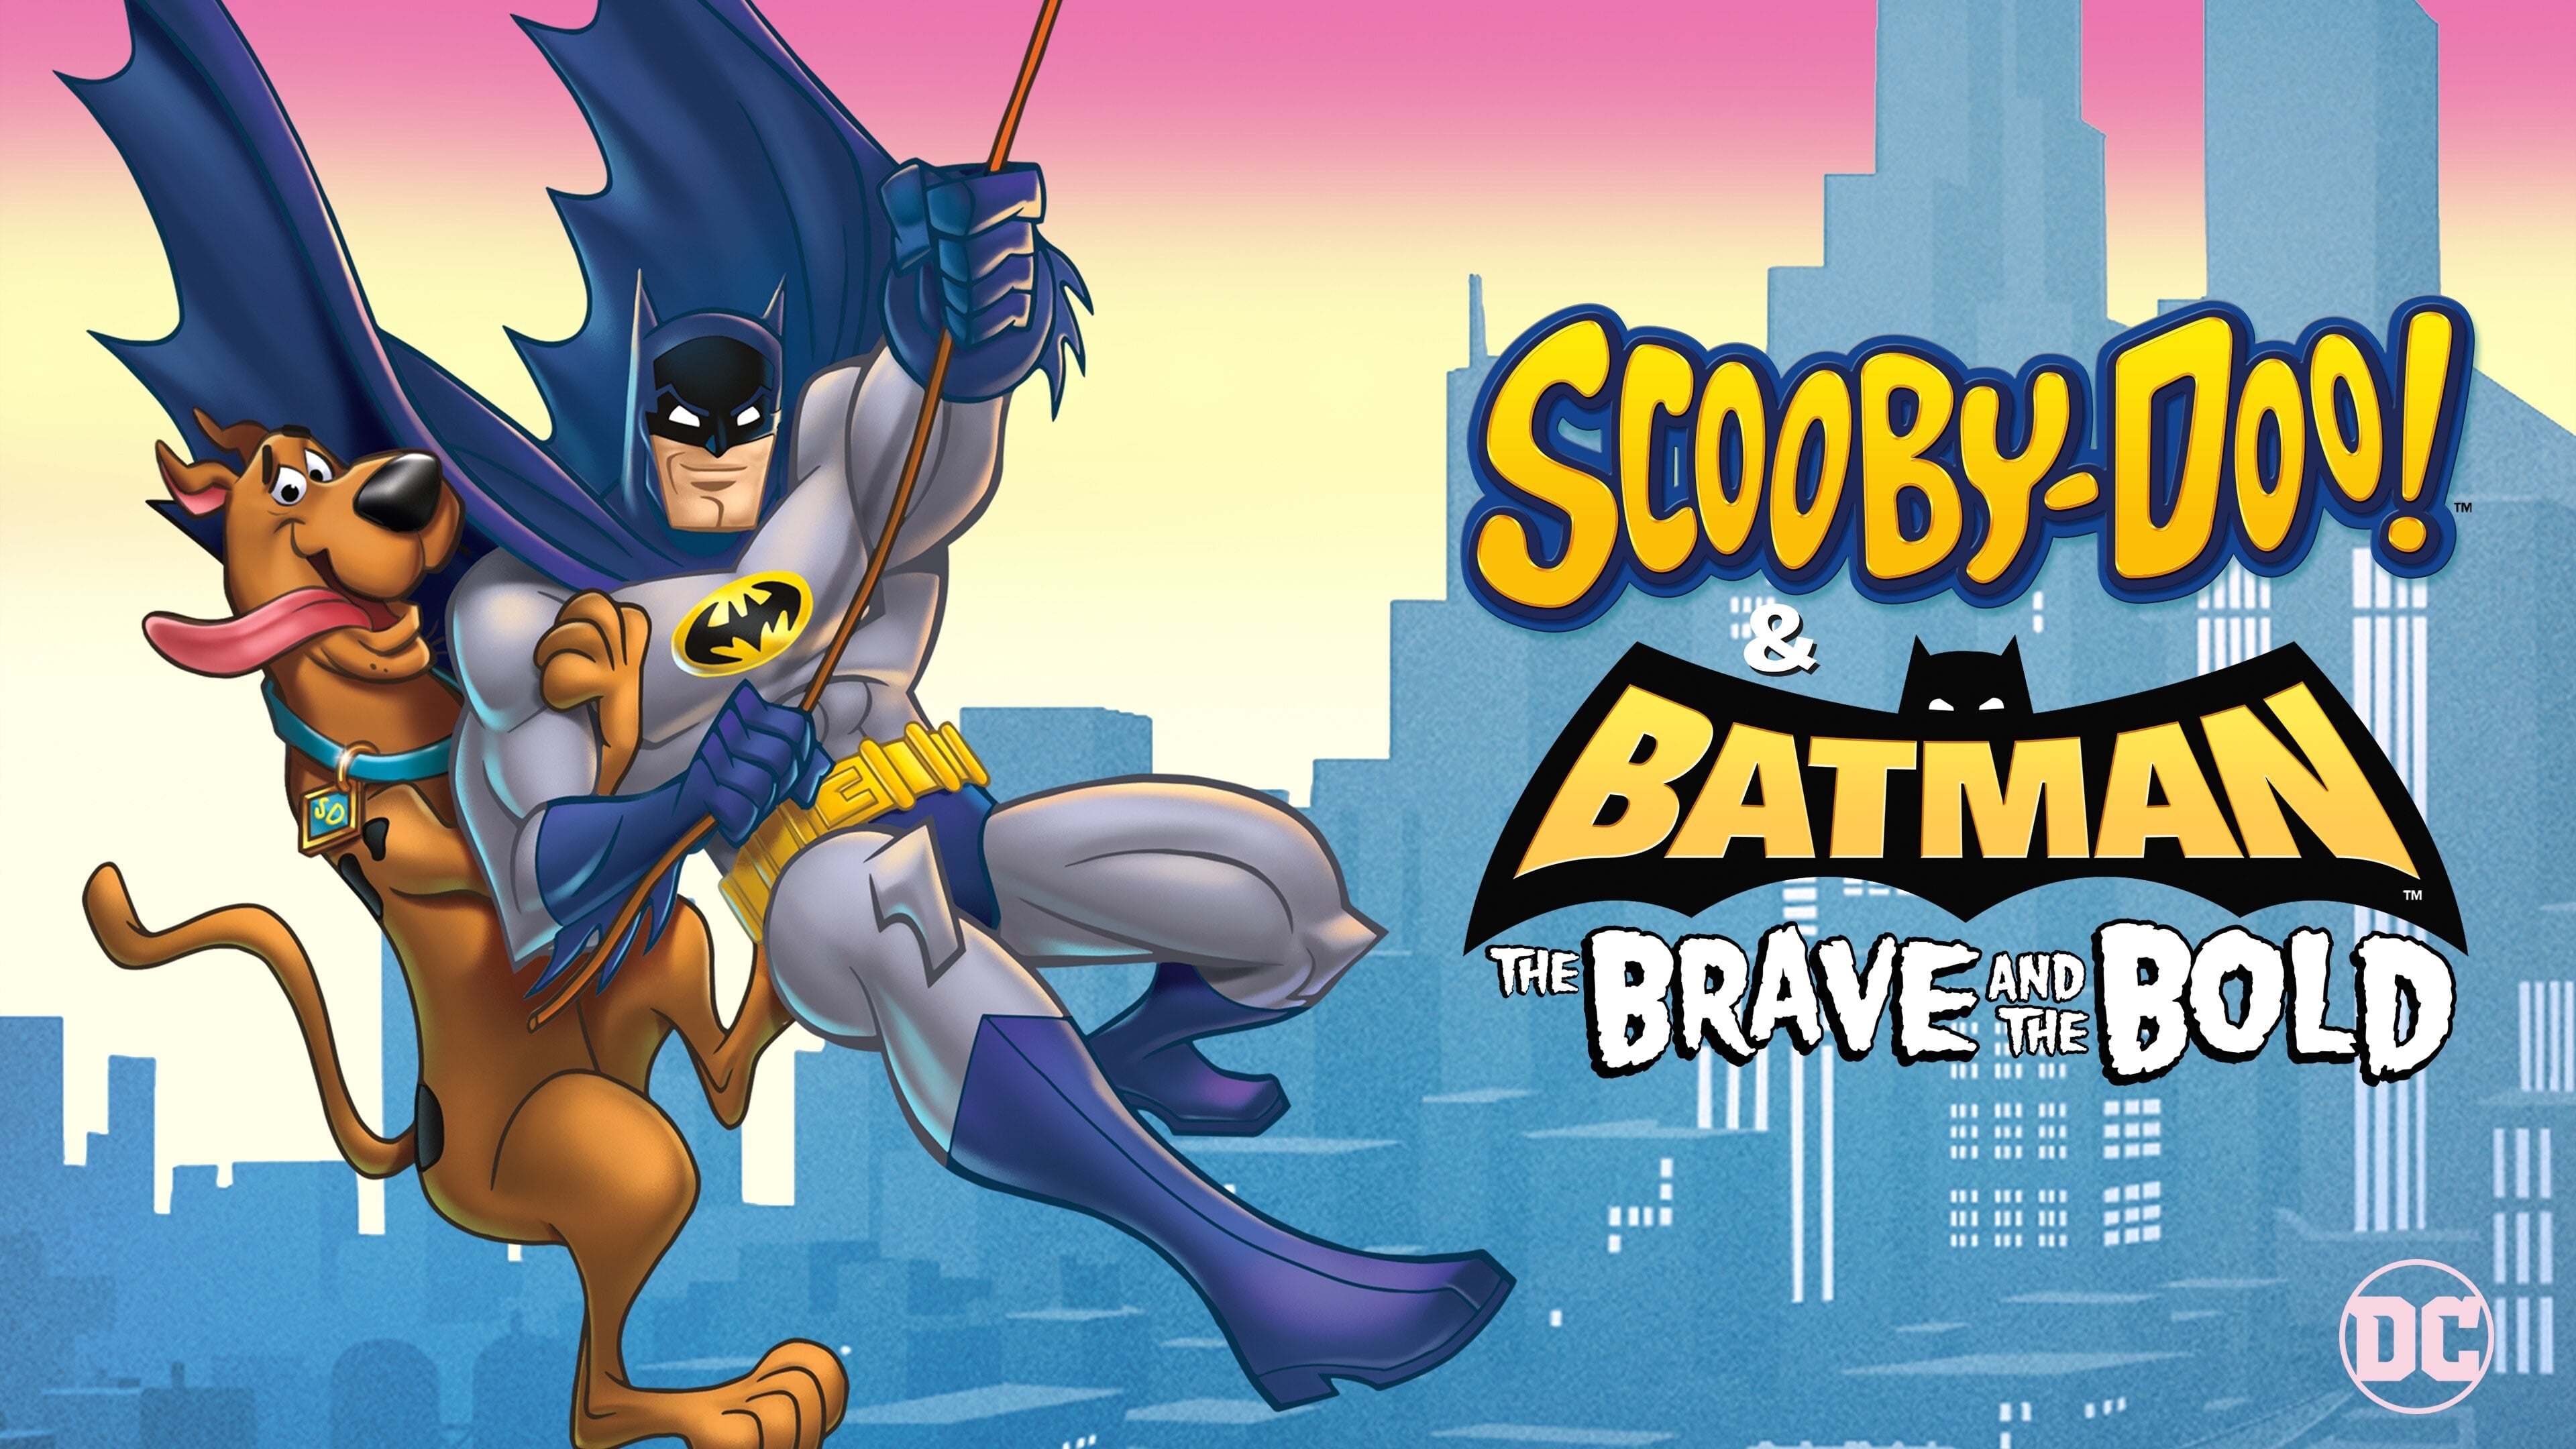 Batman and Scooby-Doo Wallpaper, HD Anime 4K Wallpapers, Images and ...